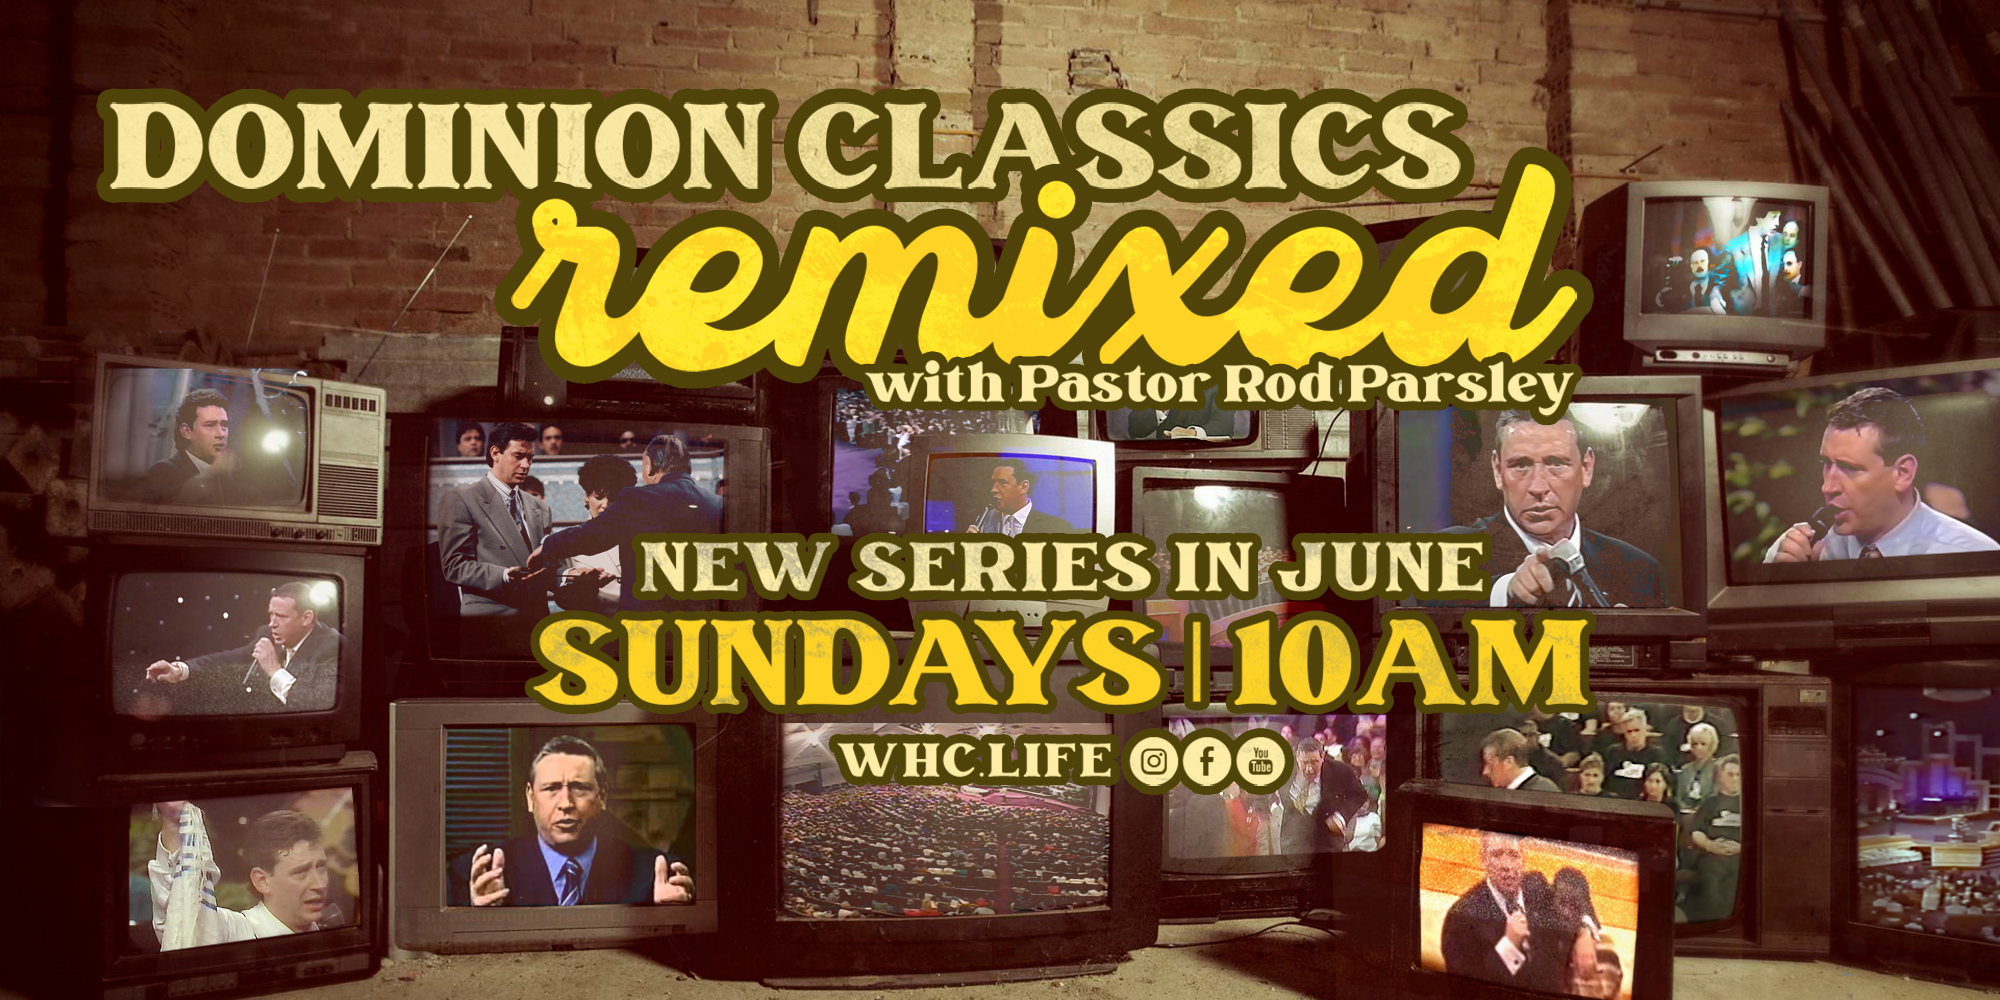 DCM Classics Remixed with Pastor Rod Parsley New Series in June Sundays 10:00 am whc.life